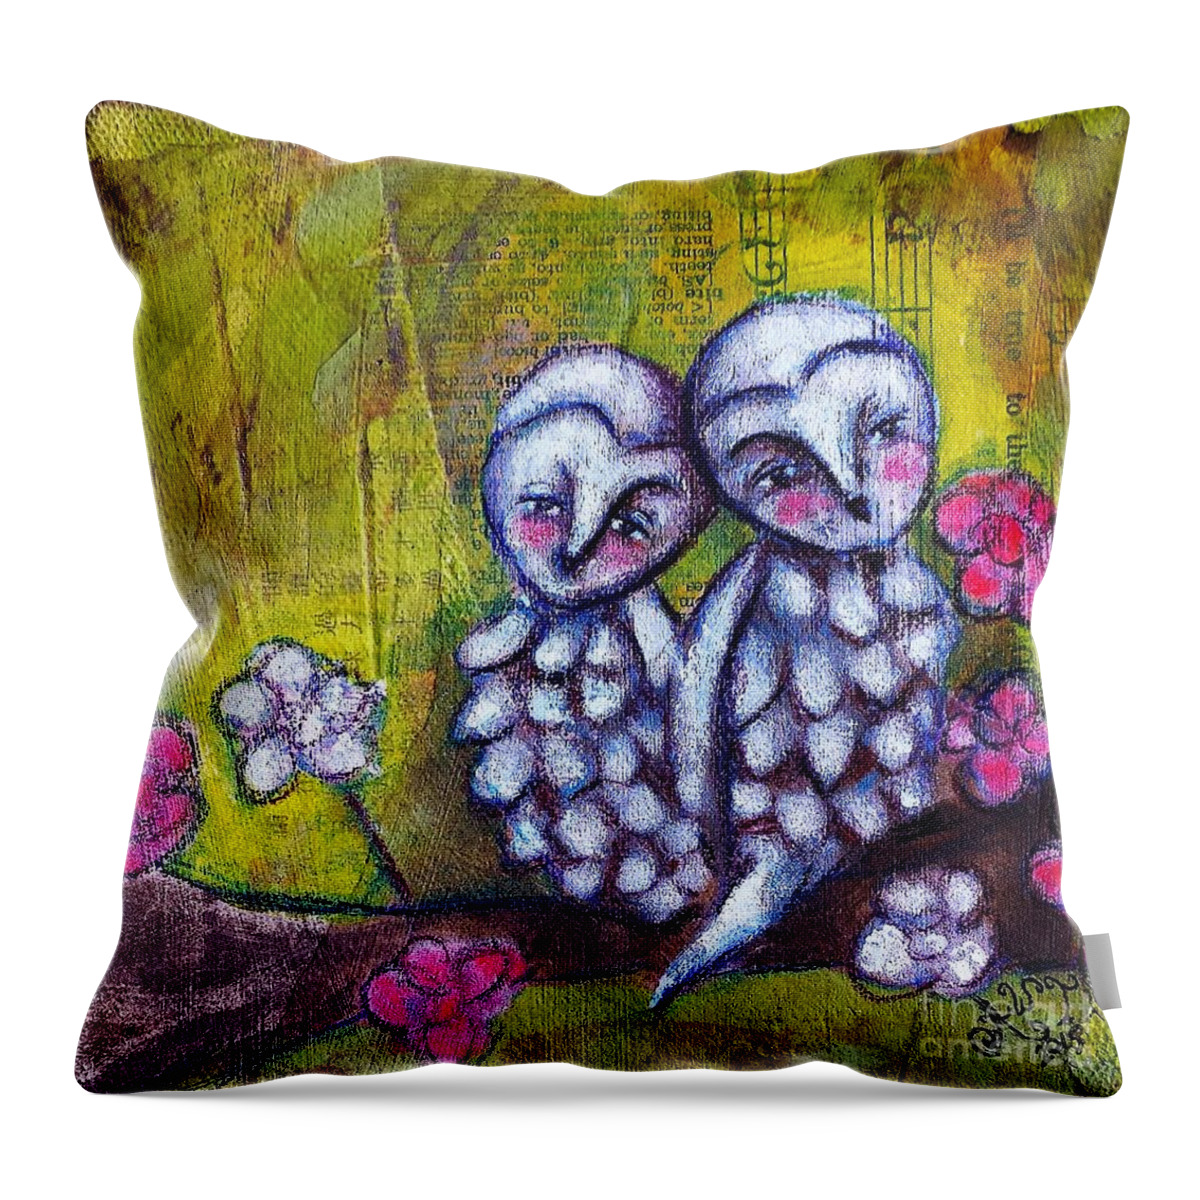 Owl Throw Pillow featuring the painting Owlies by Allison Weeks Thomas